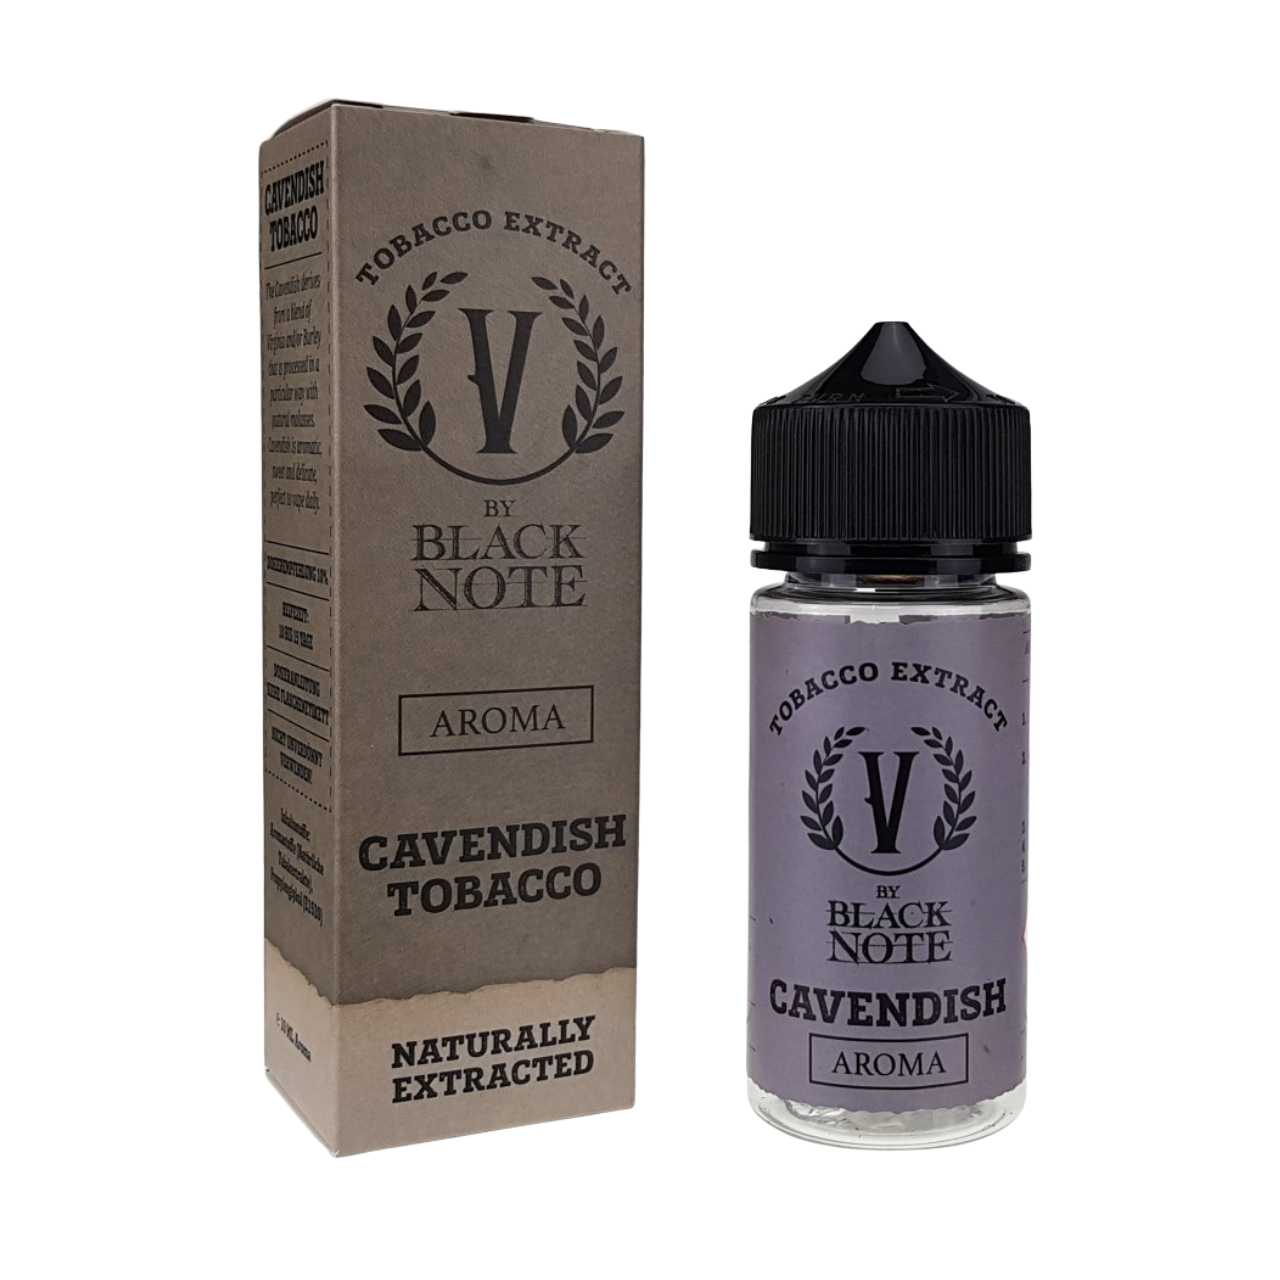 V by Black Note Cavendish Tobacco Aroma Longfill